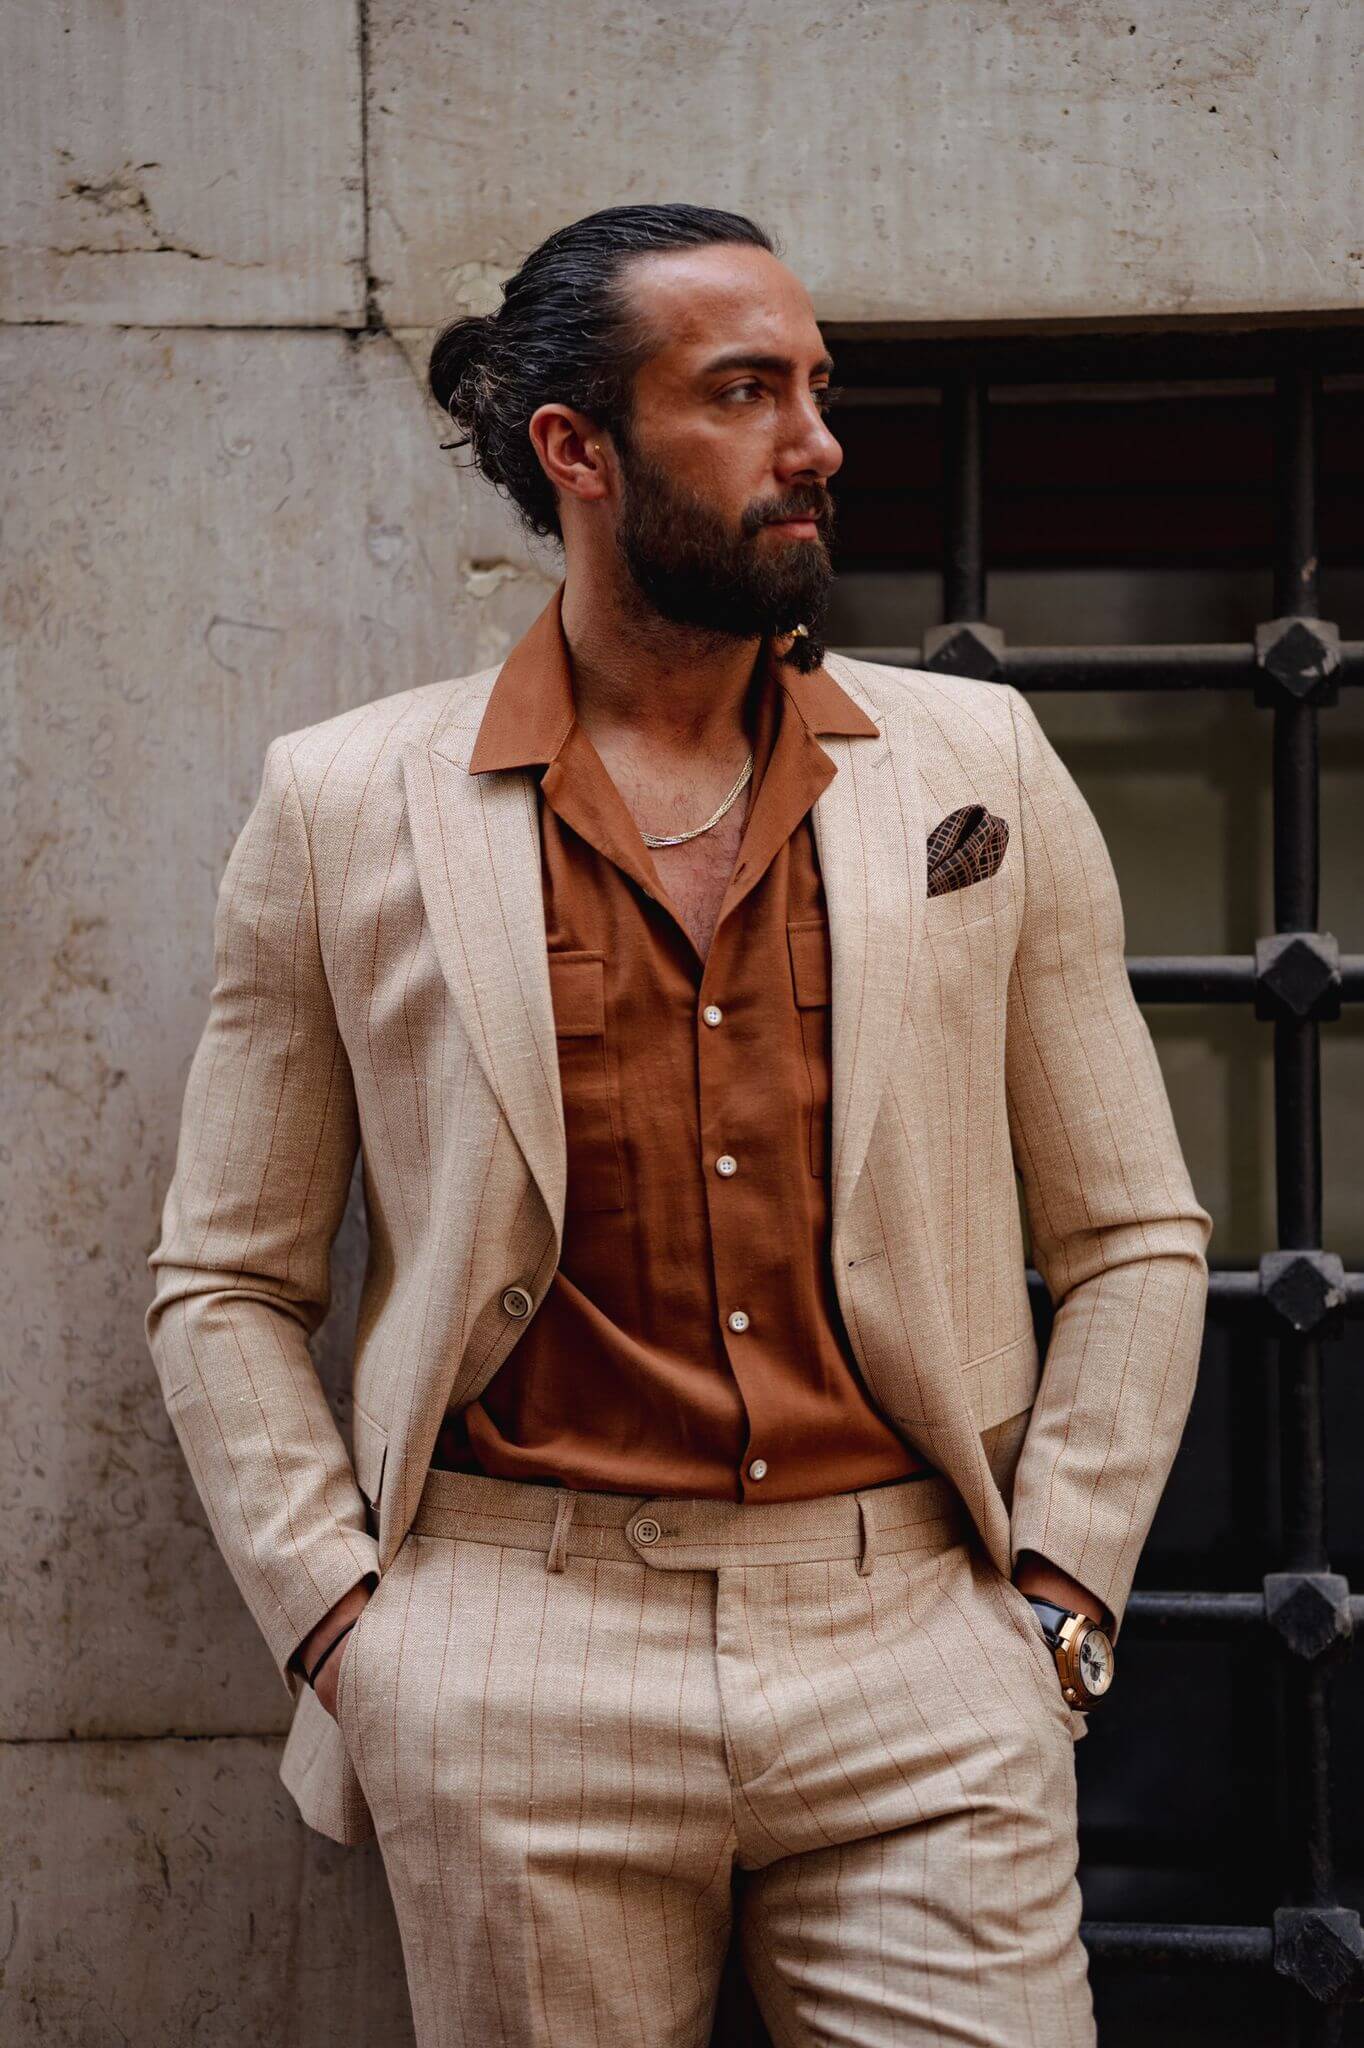 A Striped Beige Linen Suit on display